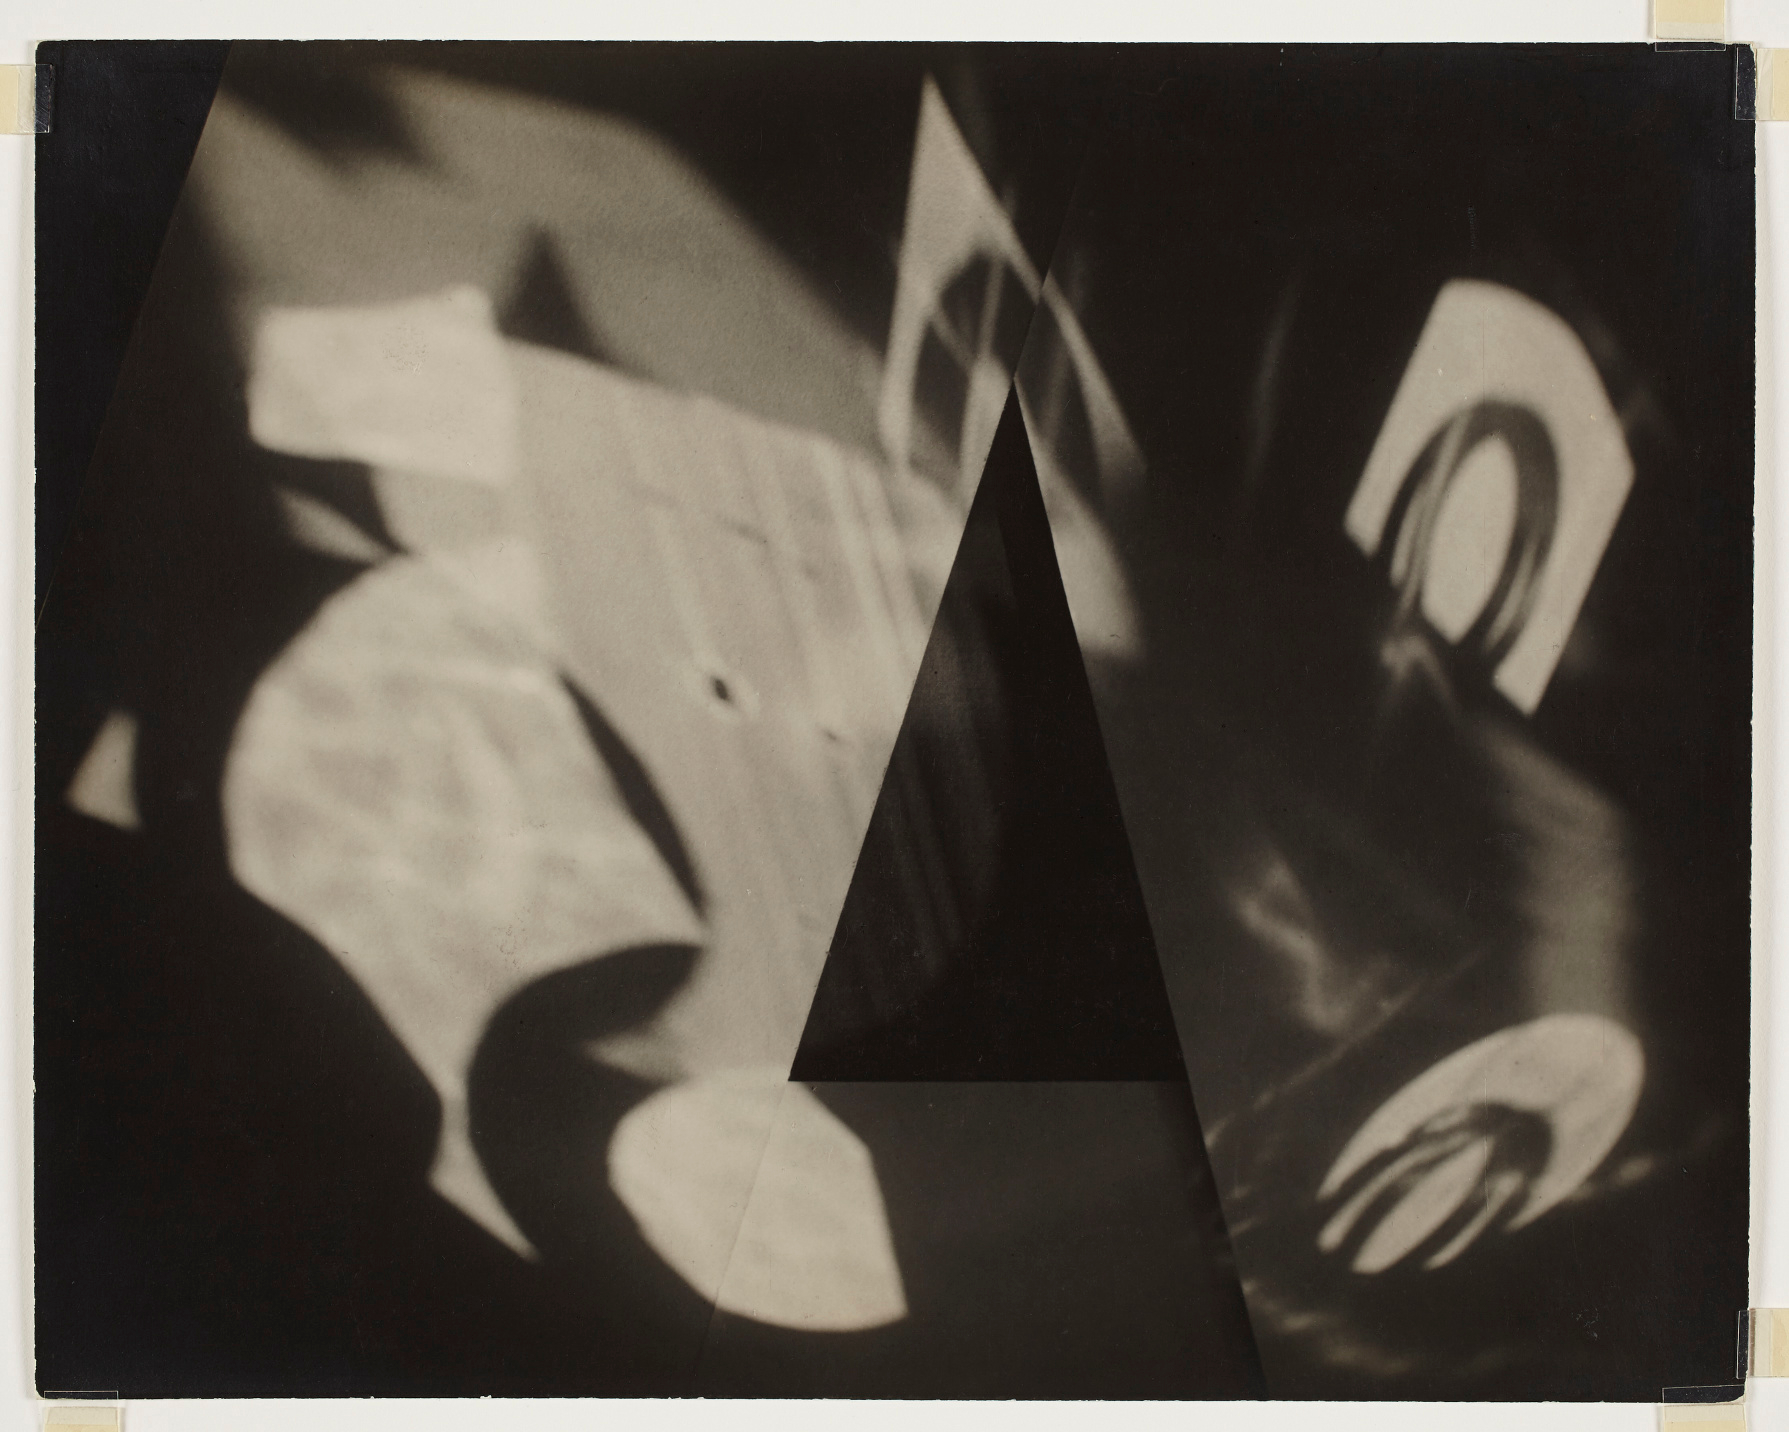     Jaromir Funke, Abstraction, 1925-1930. Gelatin silver print, Sheet: 23.1 × 29.2 cm. Malcolmson Collection. Gift of Harry and Ann Malcolmson in partnership with a private donor, 2014. © Art Gallery of Ontario 2014/550. AGO.114541

